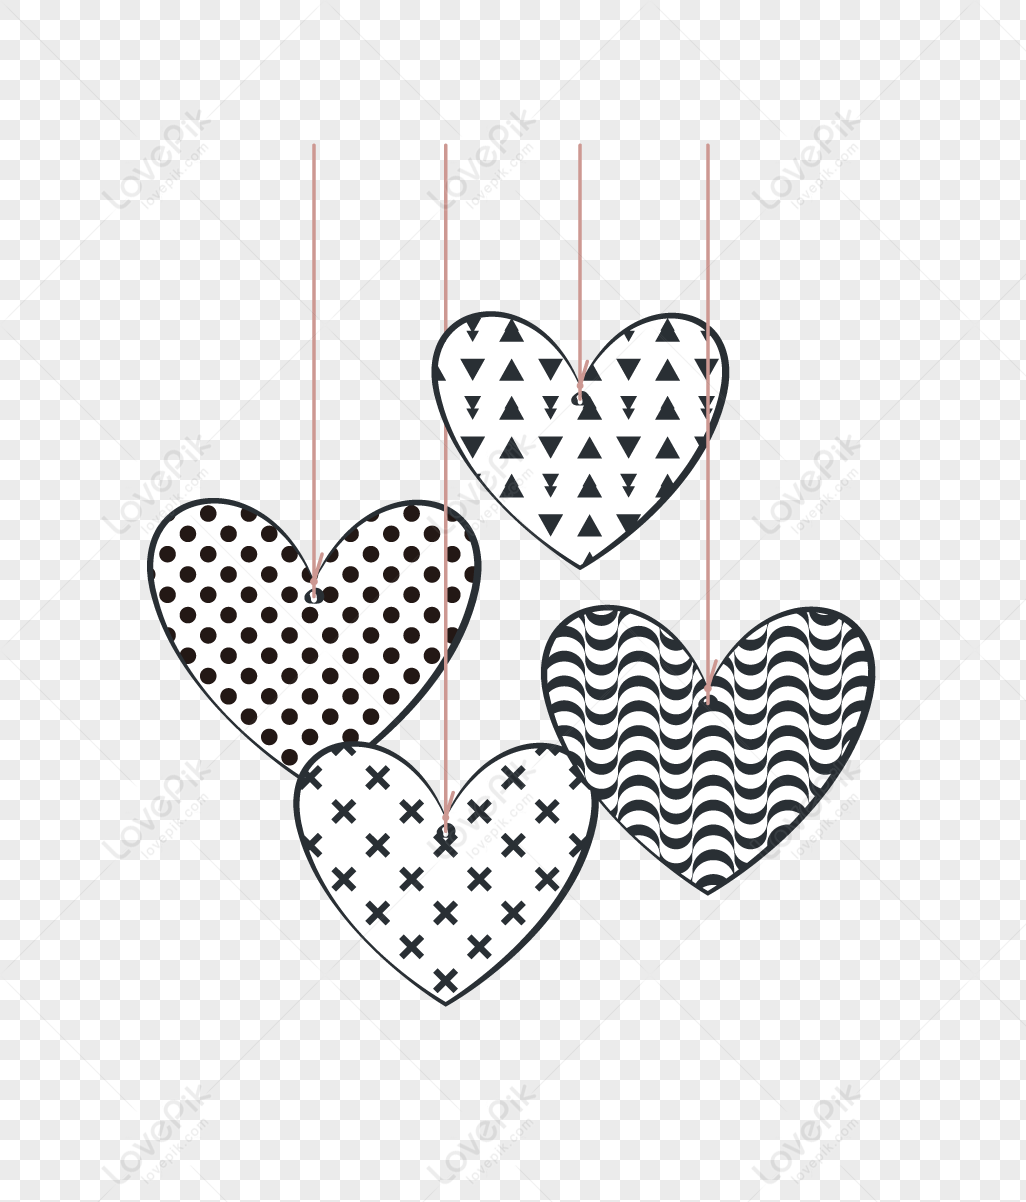 Heart Clipart Black And White Pngs